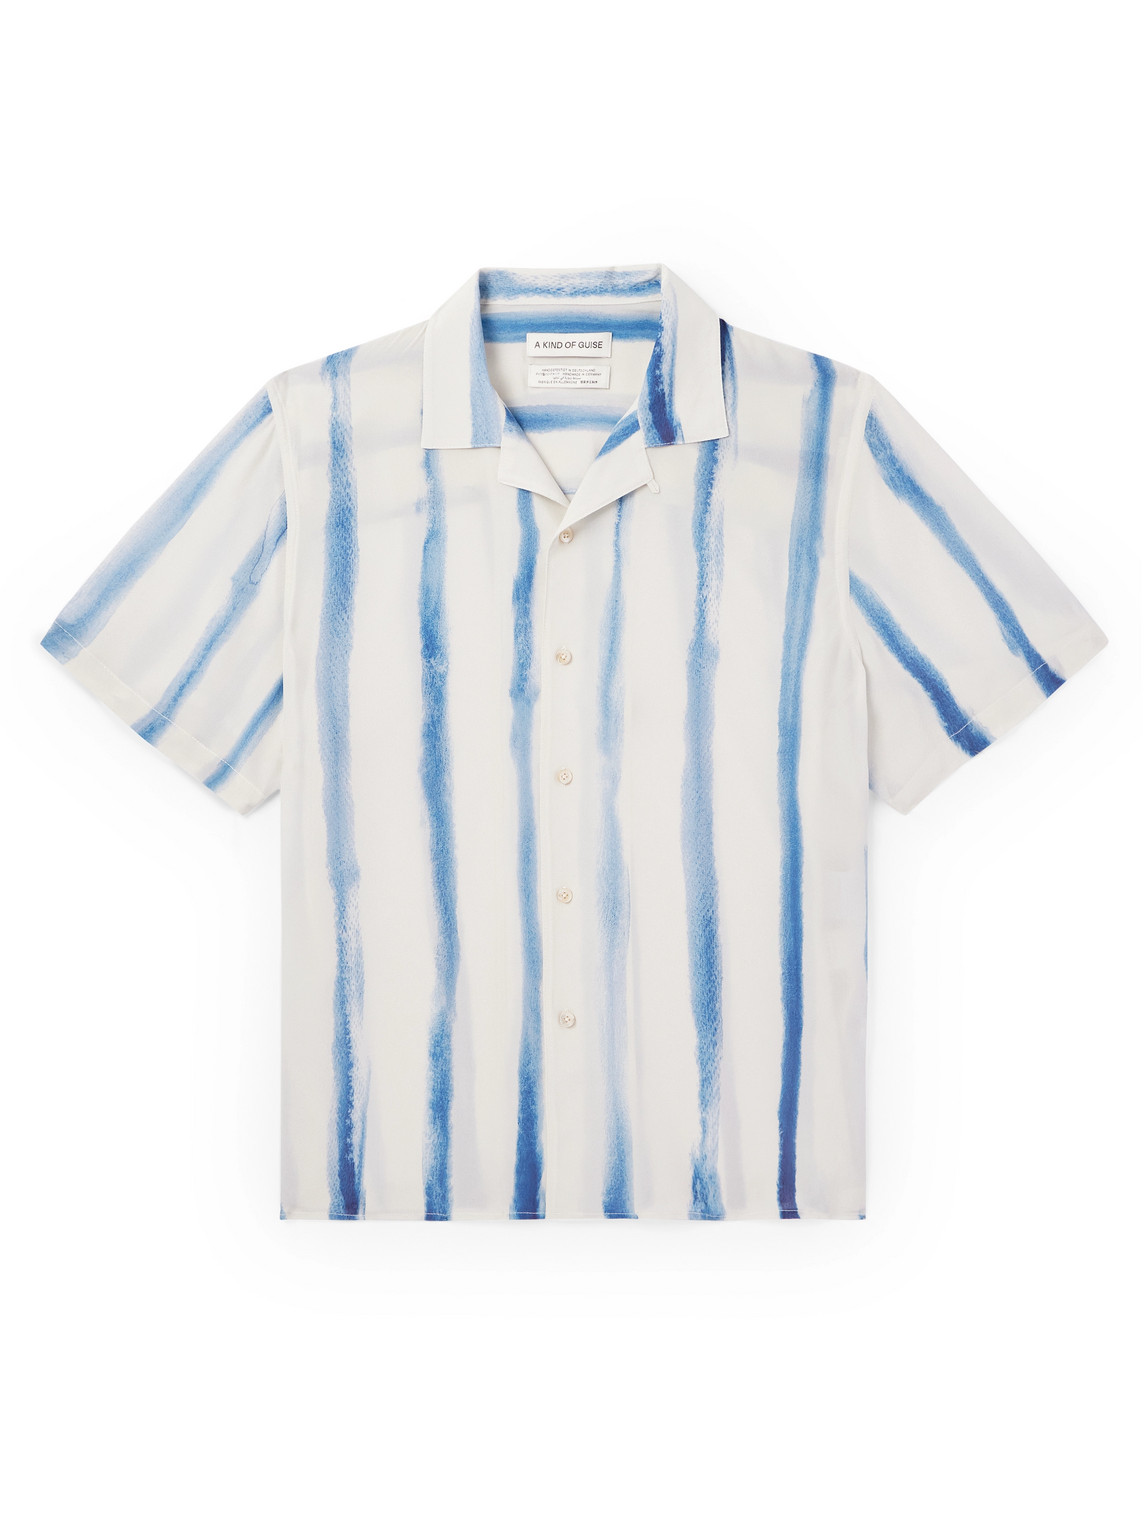 A Kind Of Guise - Gioia Convertible-Collar Striped Silk Crepe de Chine Shirt - Men - Blue - M von A Kind Of Guise